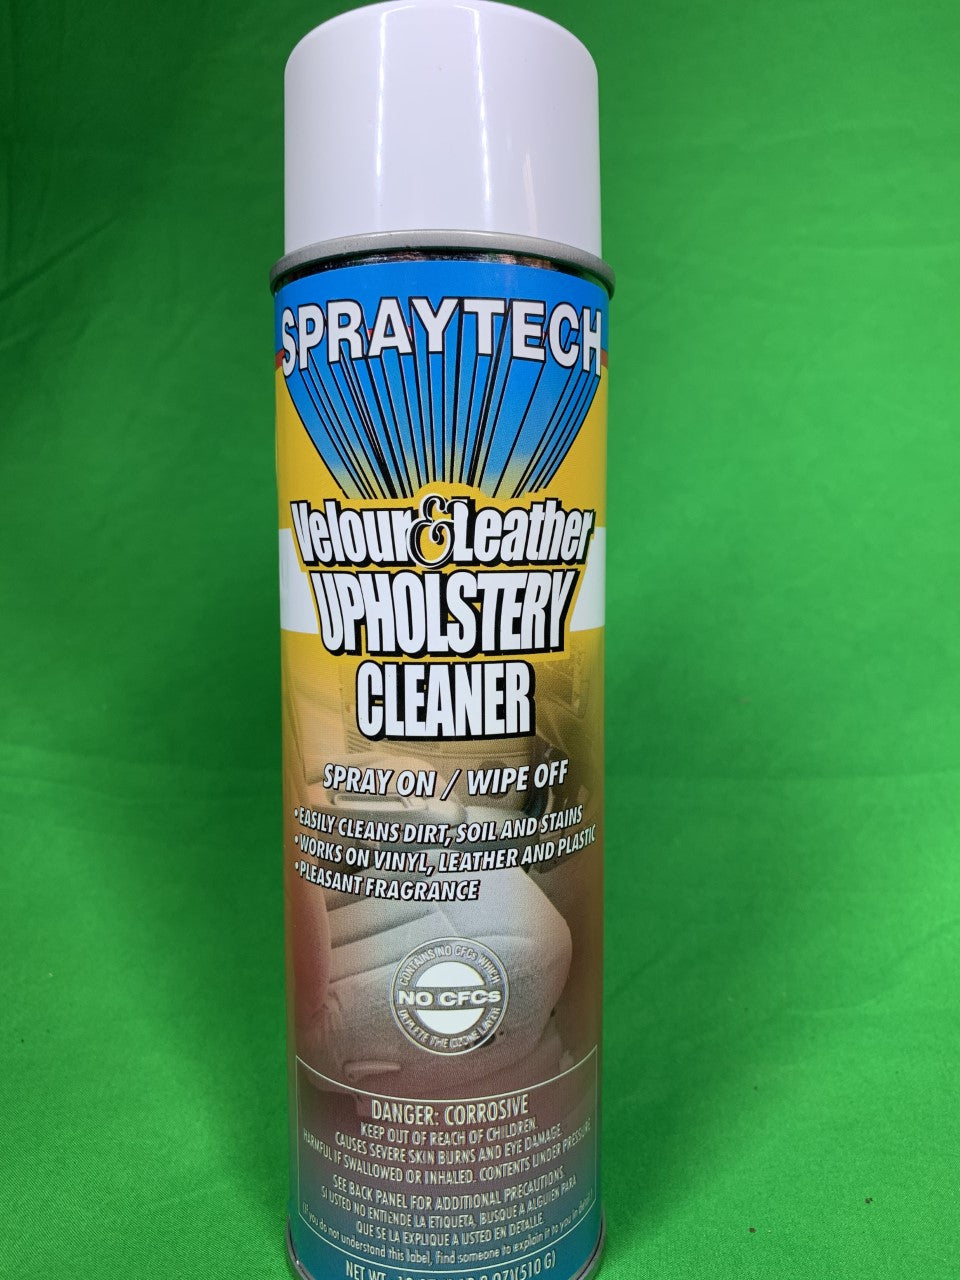 Velour & Leather Upholstery Cleaner